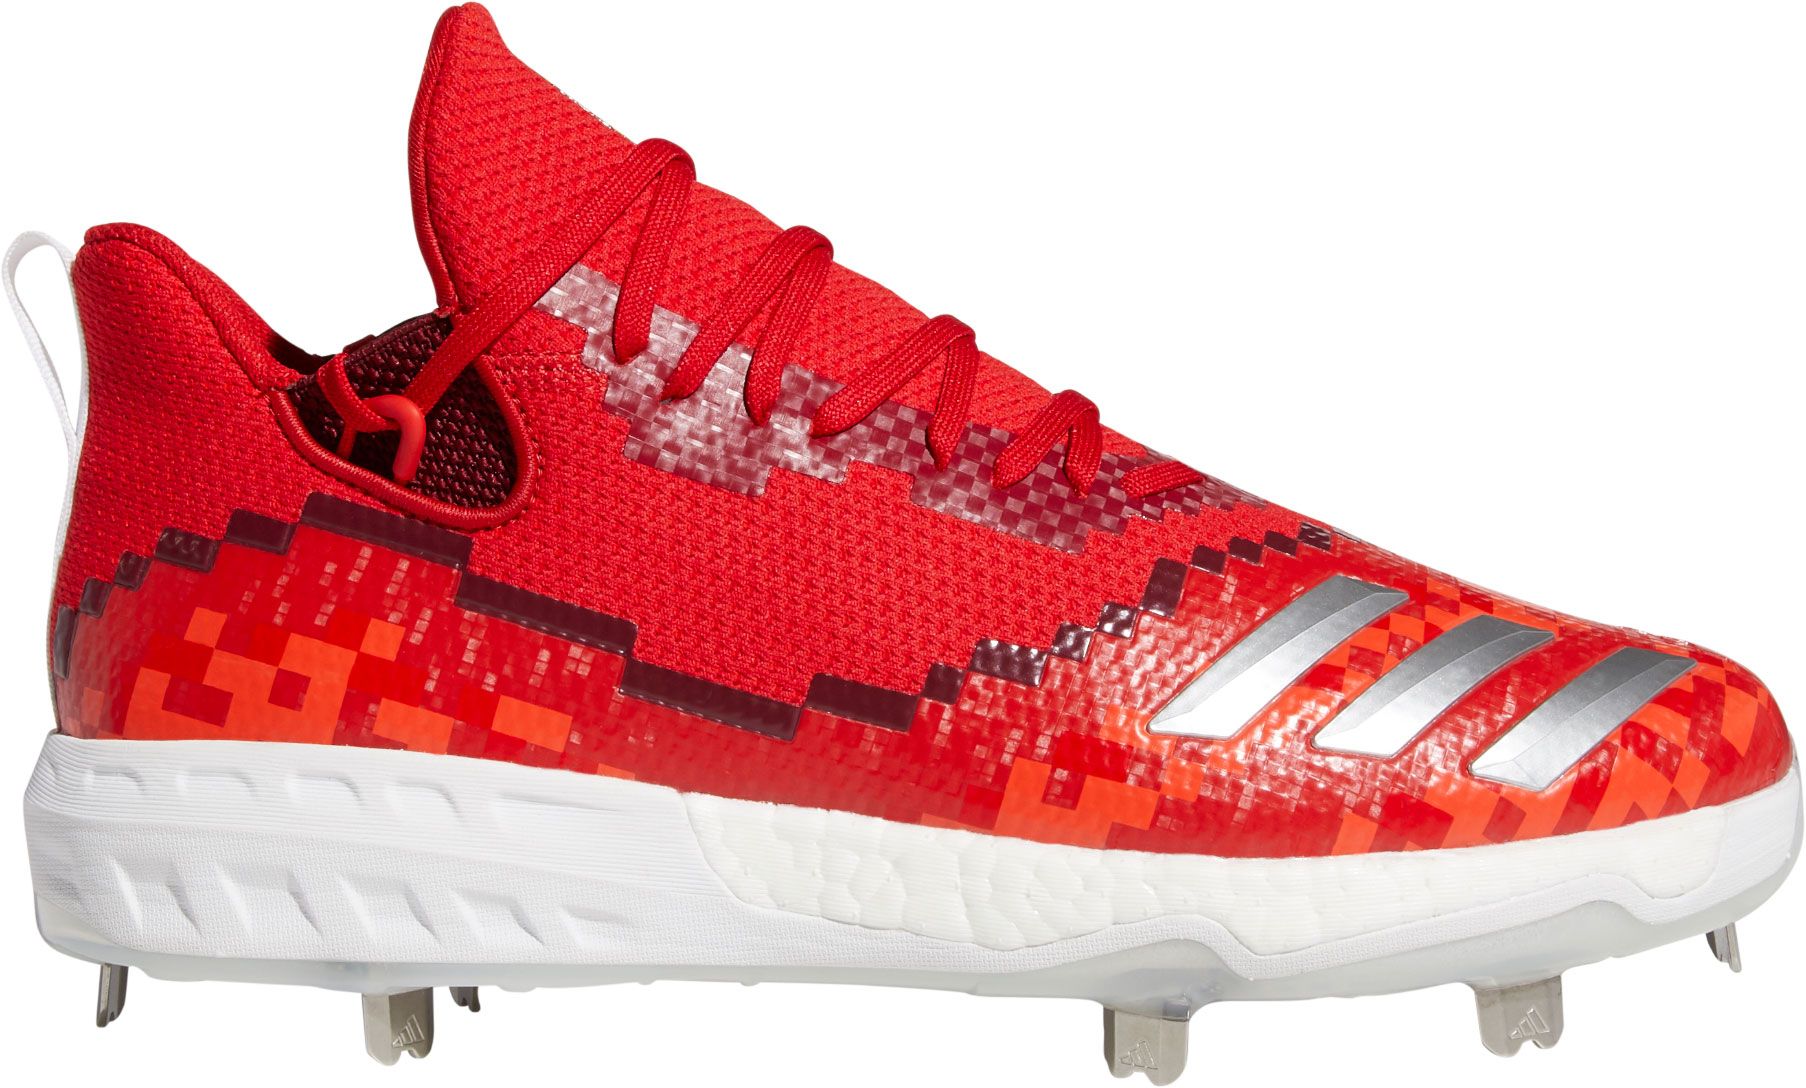 adidas baseball cleats iced out